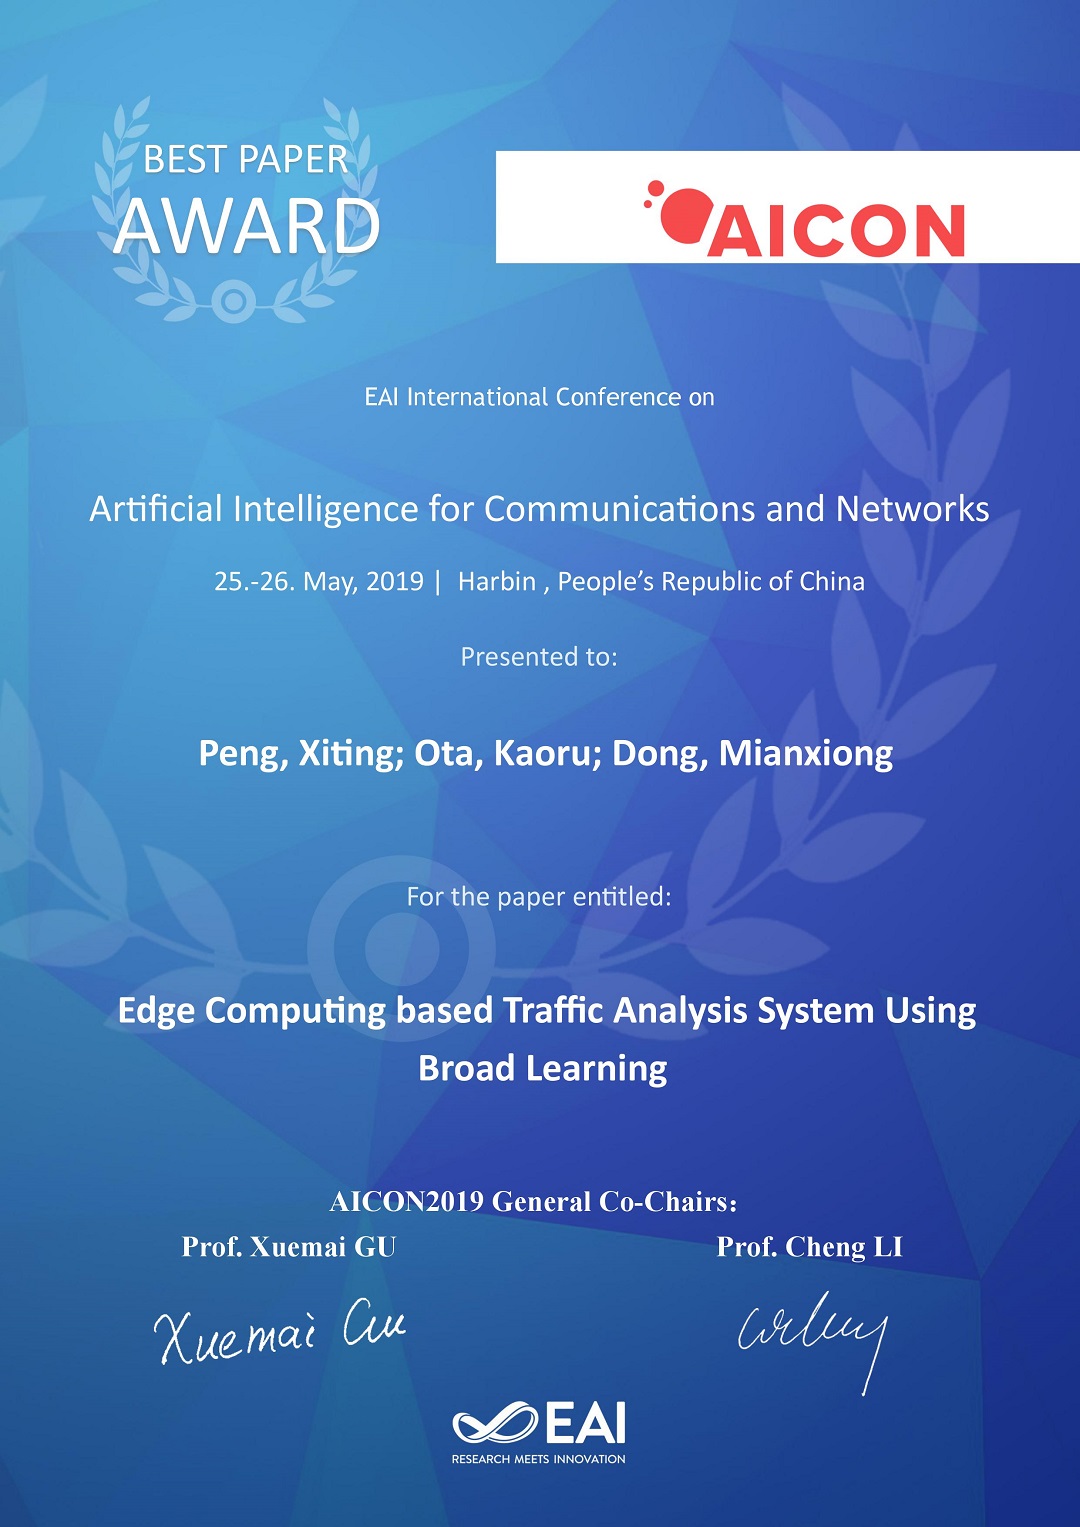 Artificial Intelligence for Communications and Networks Best Paper Award